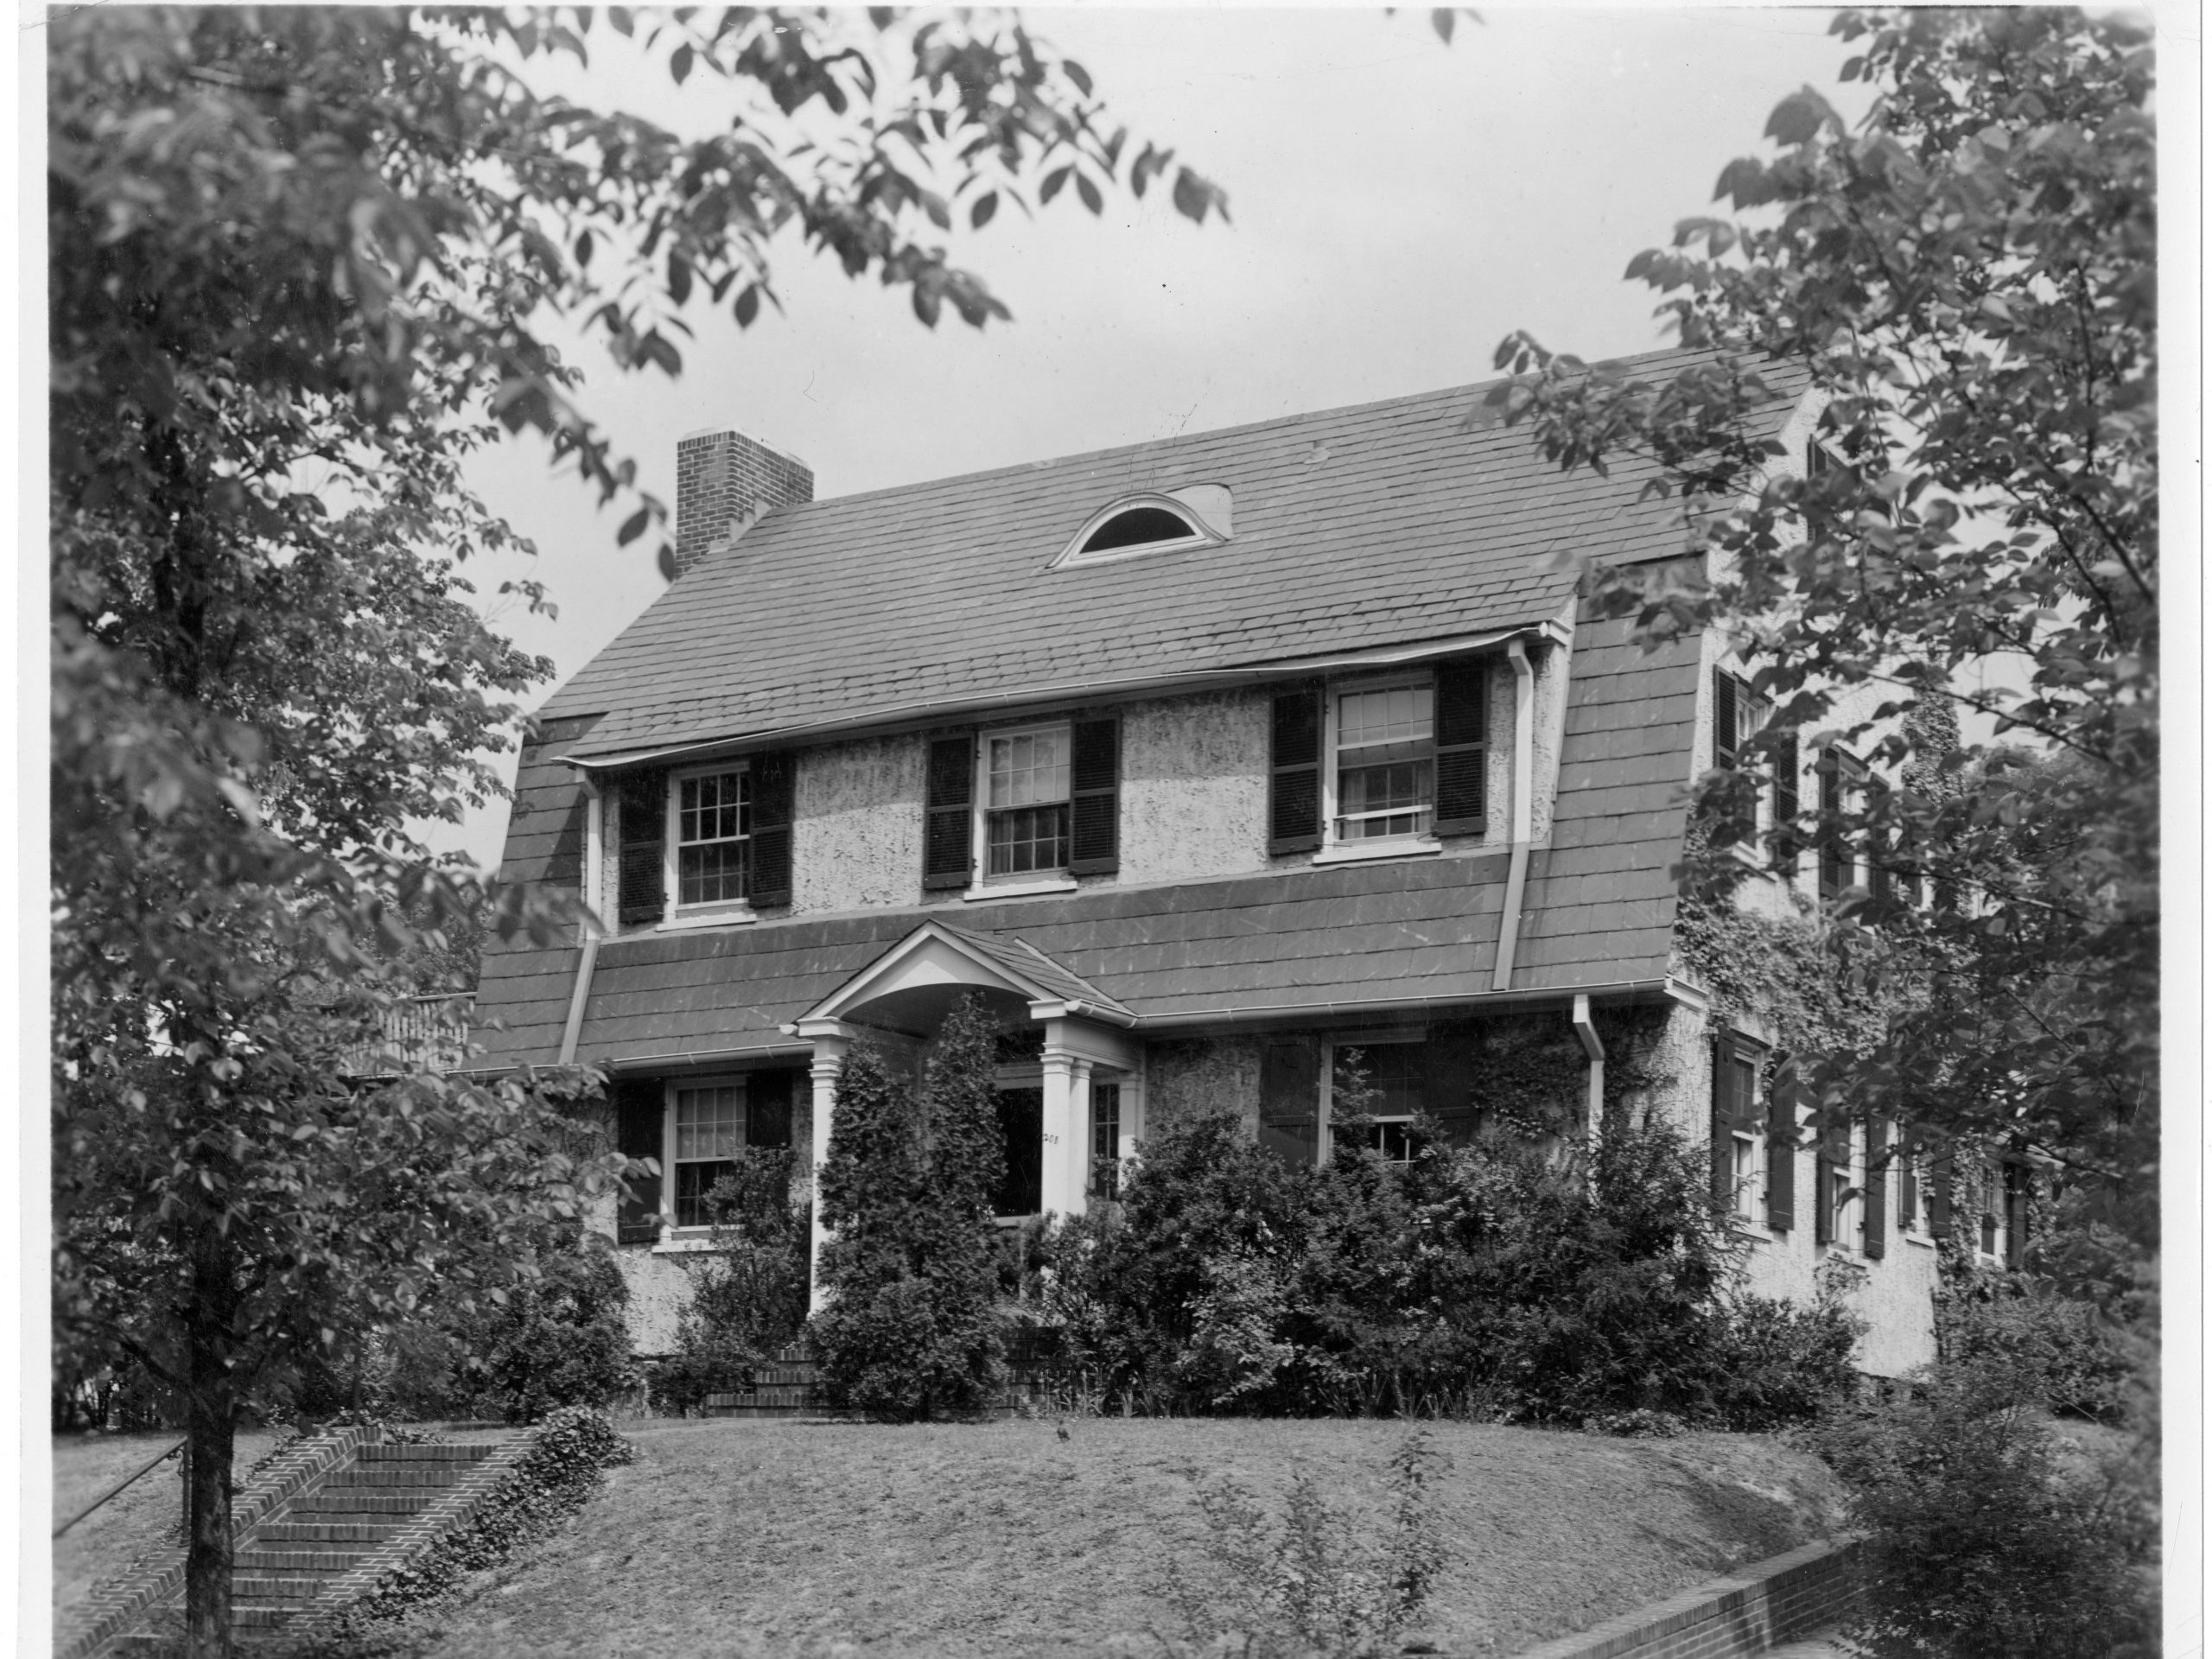 Black and white photo of a two-story home with trees.